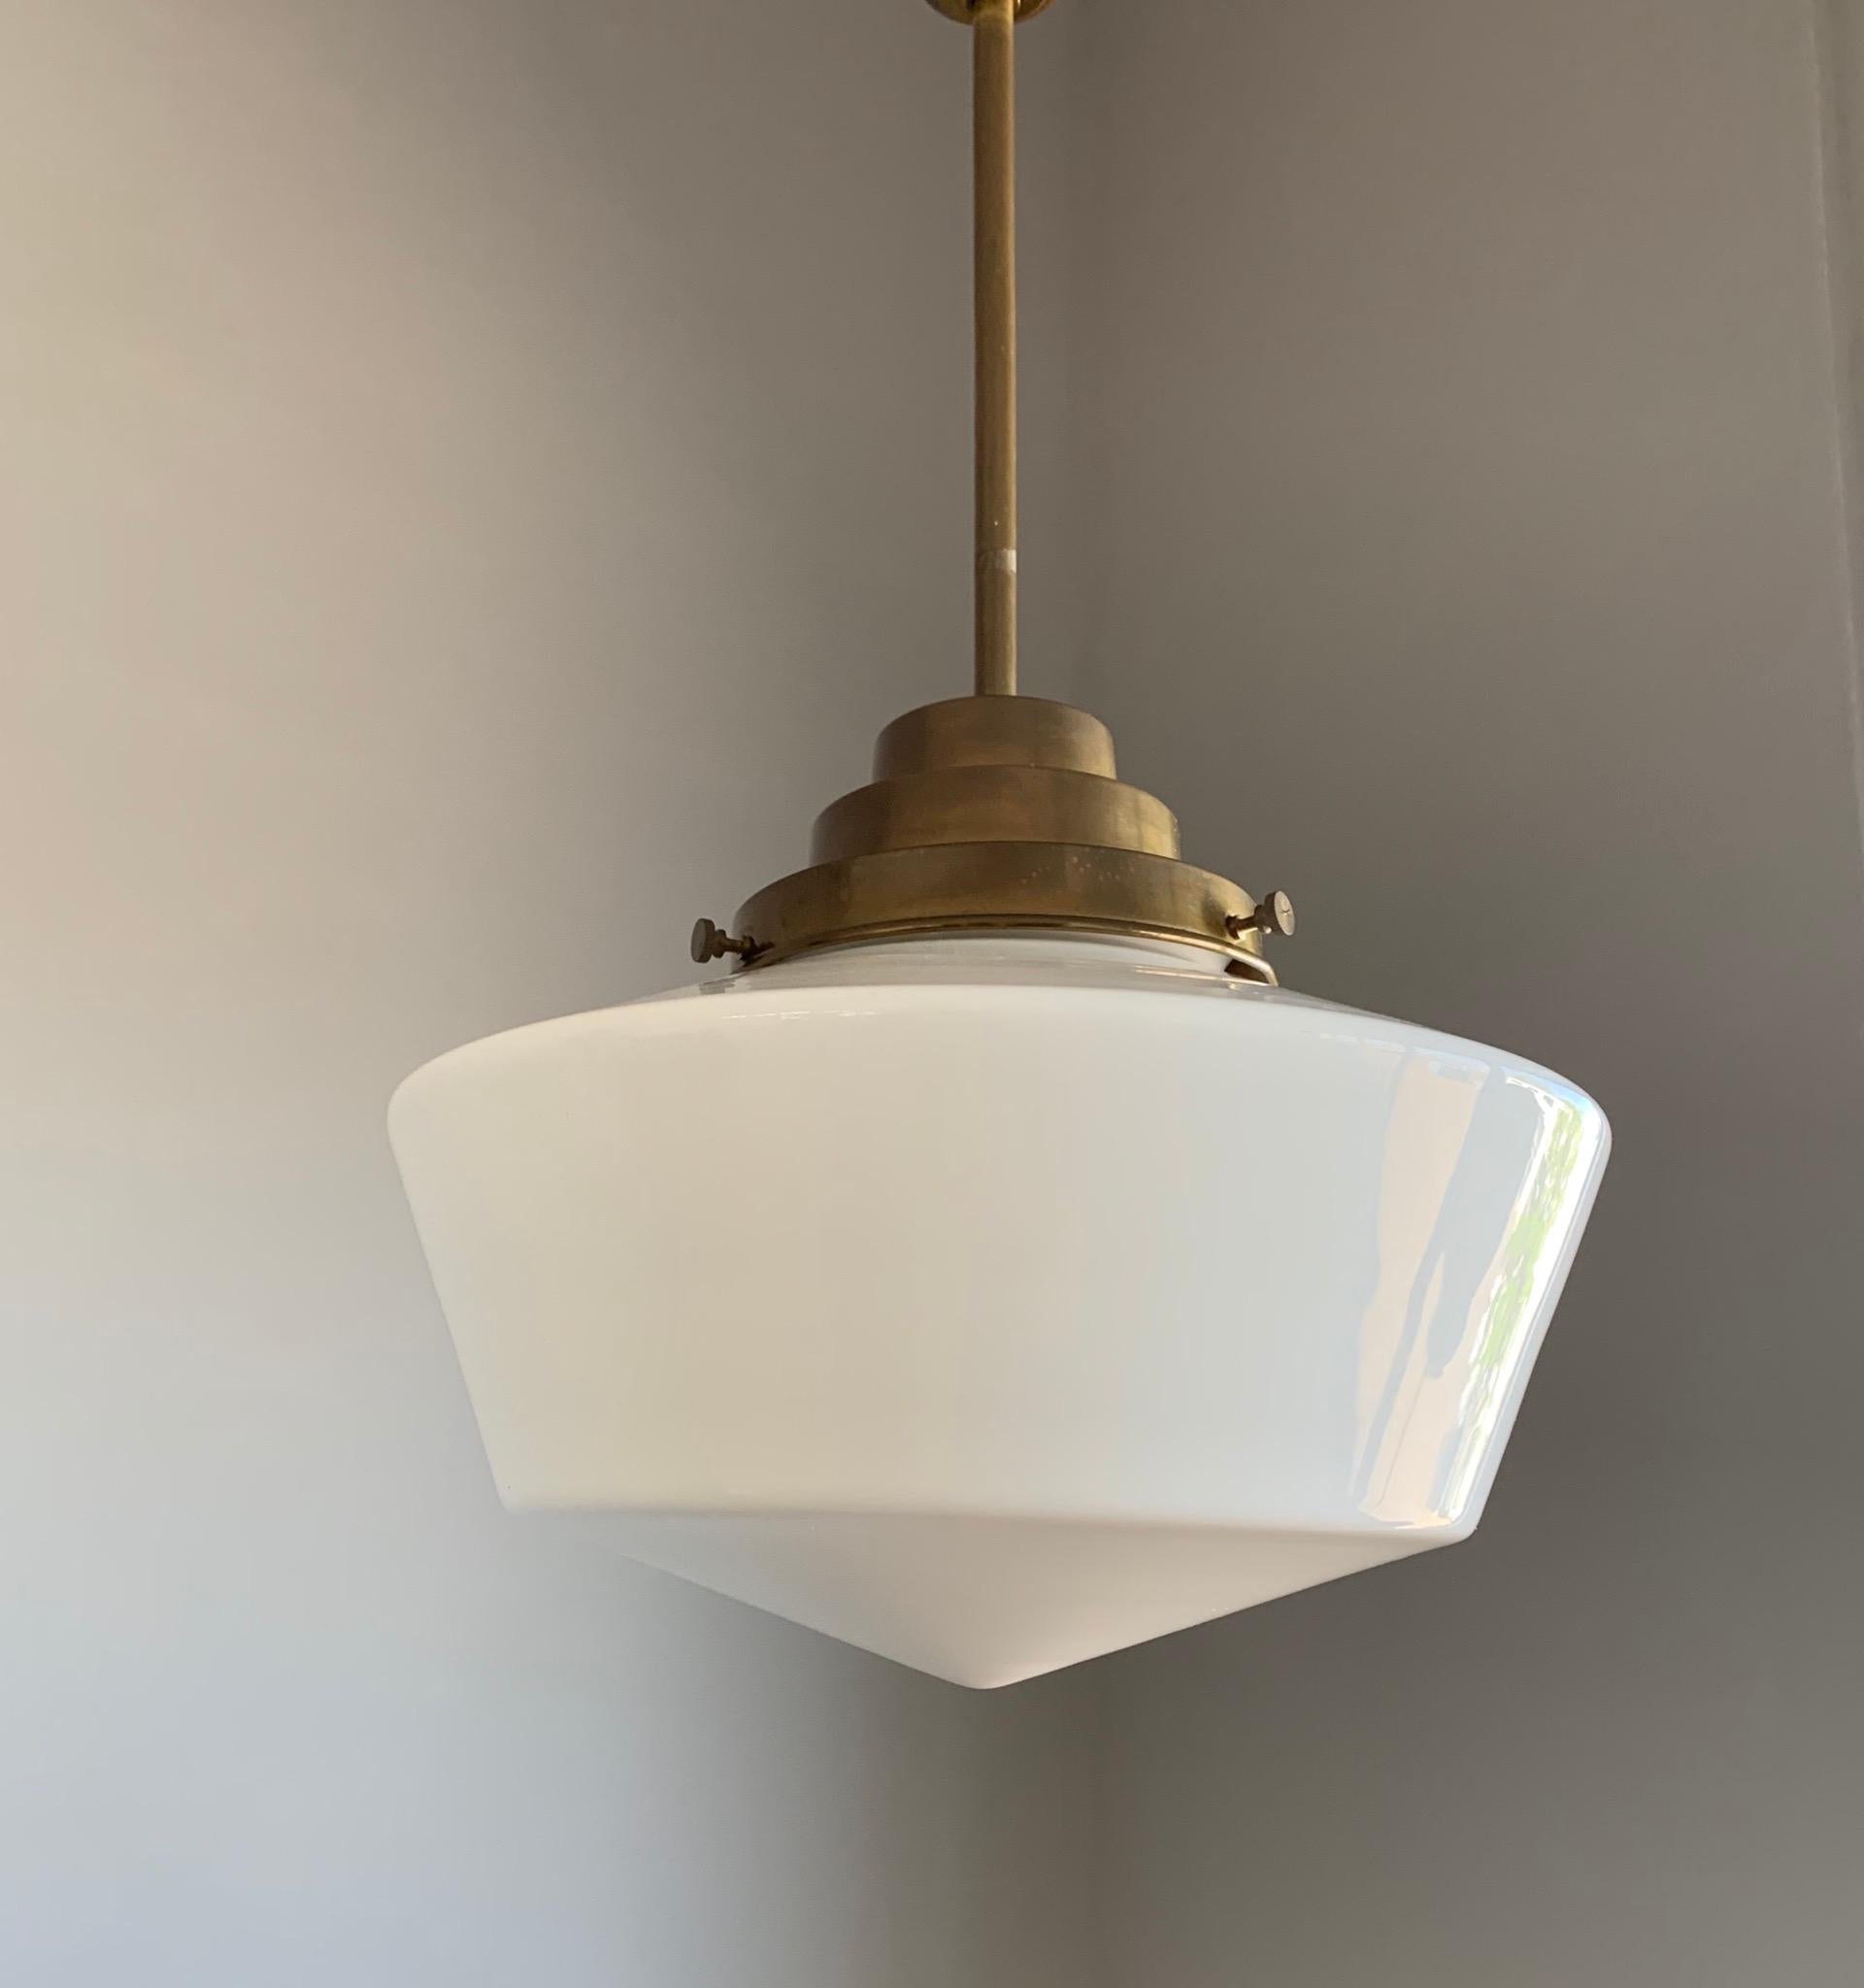 Beautiful shape and excellent condition pendant light. 

If you are looking for a beautiful and original antique pendant to grace your kitchen or bedroom then this timeless design could be perfect for you. The combination of the patinated brass and